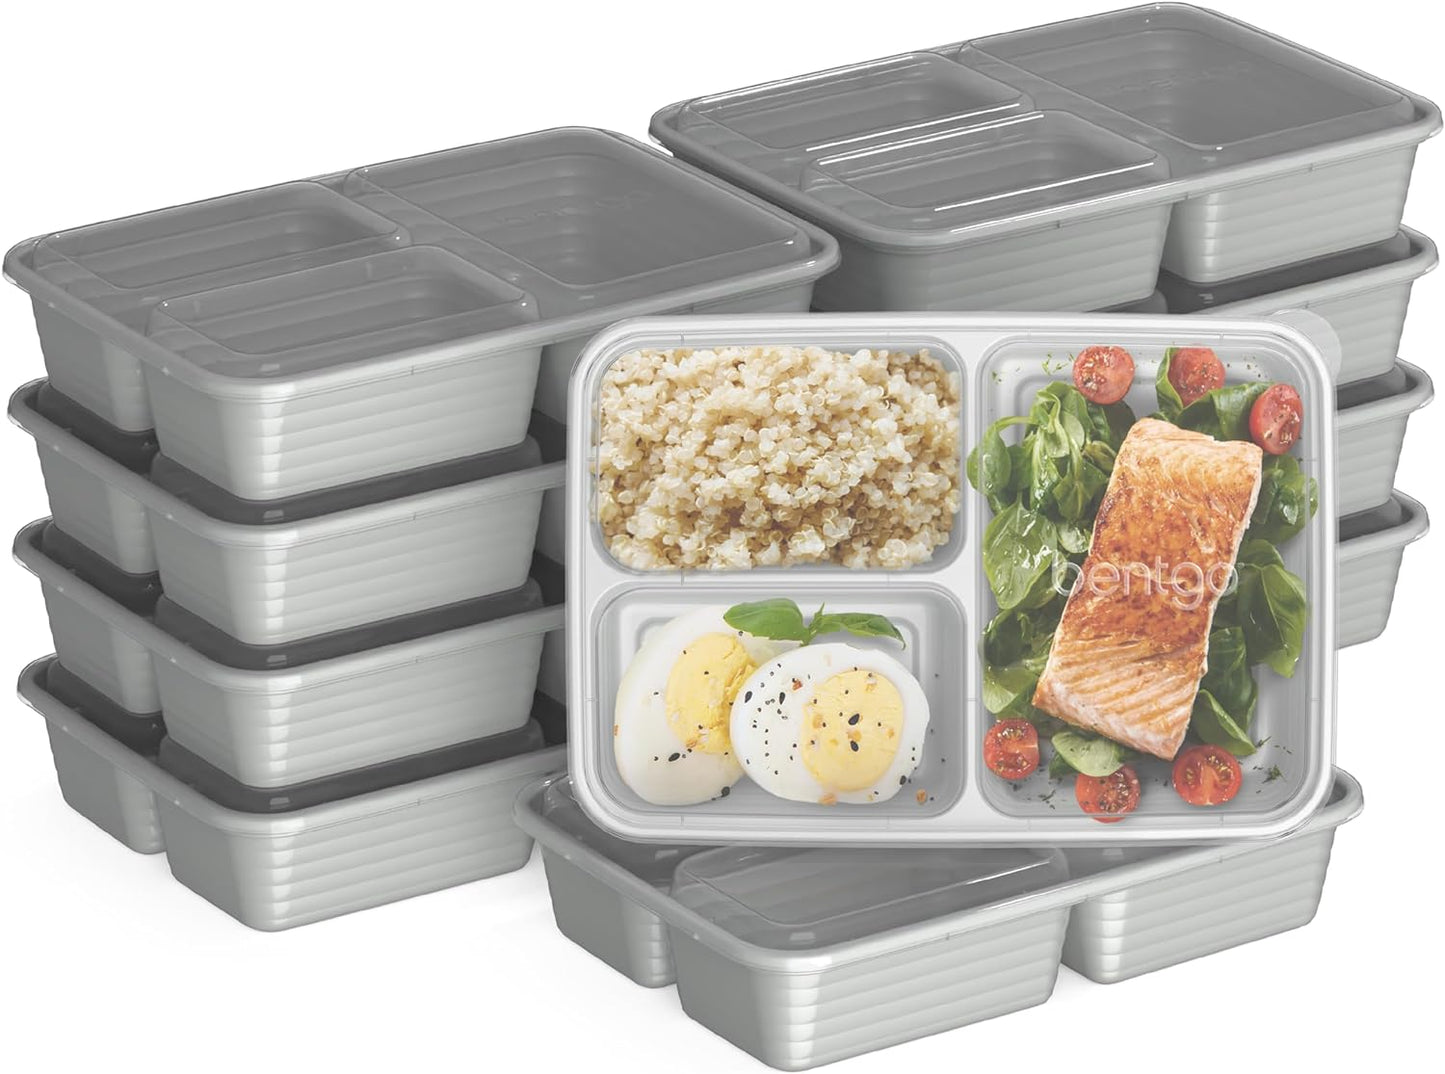 20-Piece Lightweight, Durable, Reusable BPA-Free 3-Compartment Containers - Microwave, Freezer